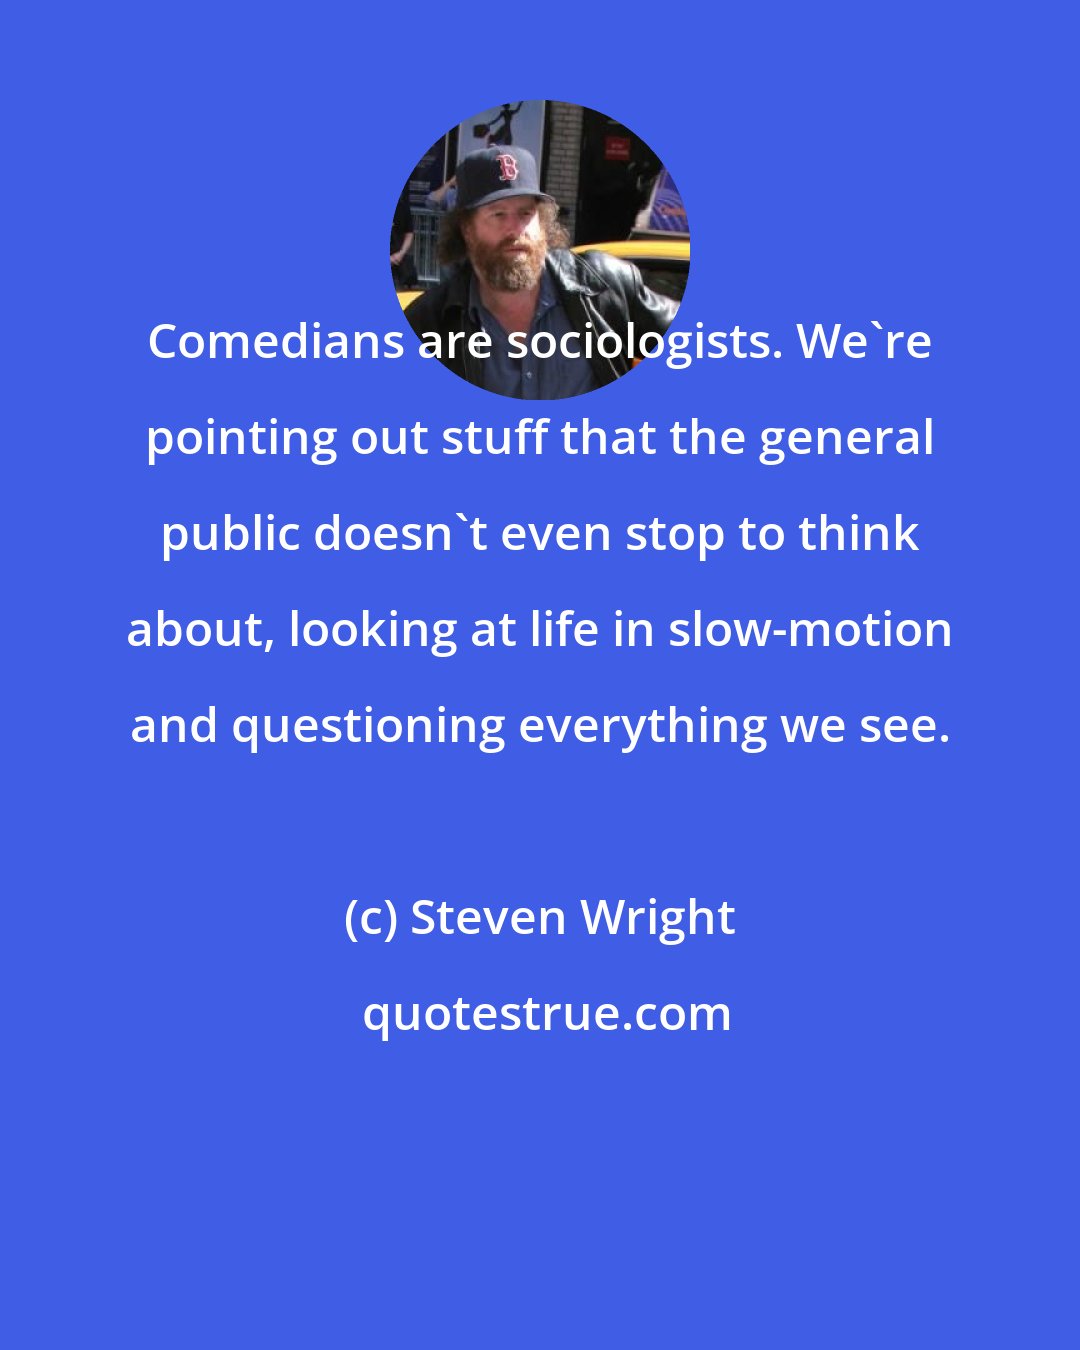 Steven Wright: Comedians are sociologists. We're pointing out stuff that the general public doesn't even stop to think about, looking at life in slow-motion and questioning everything we see.